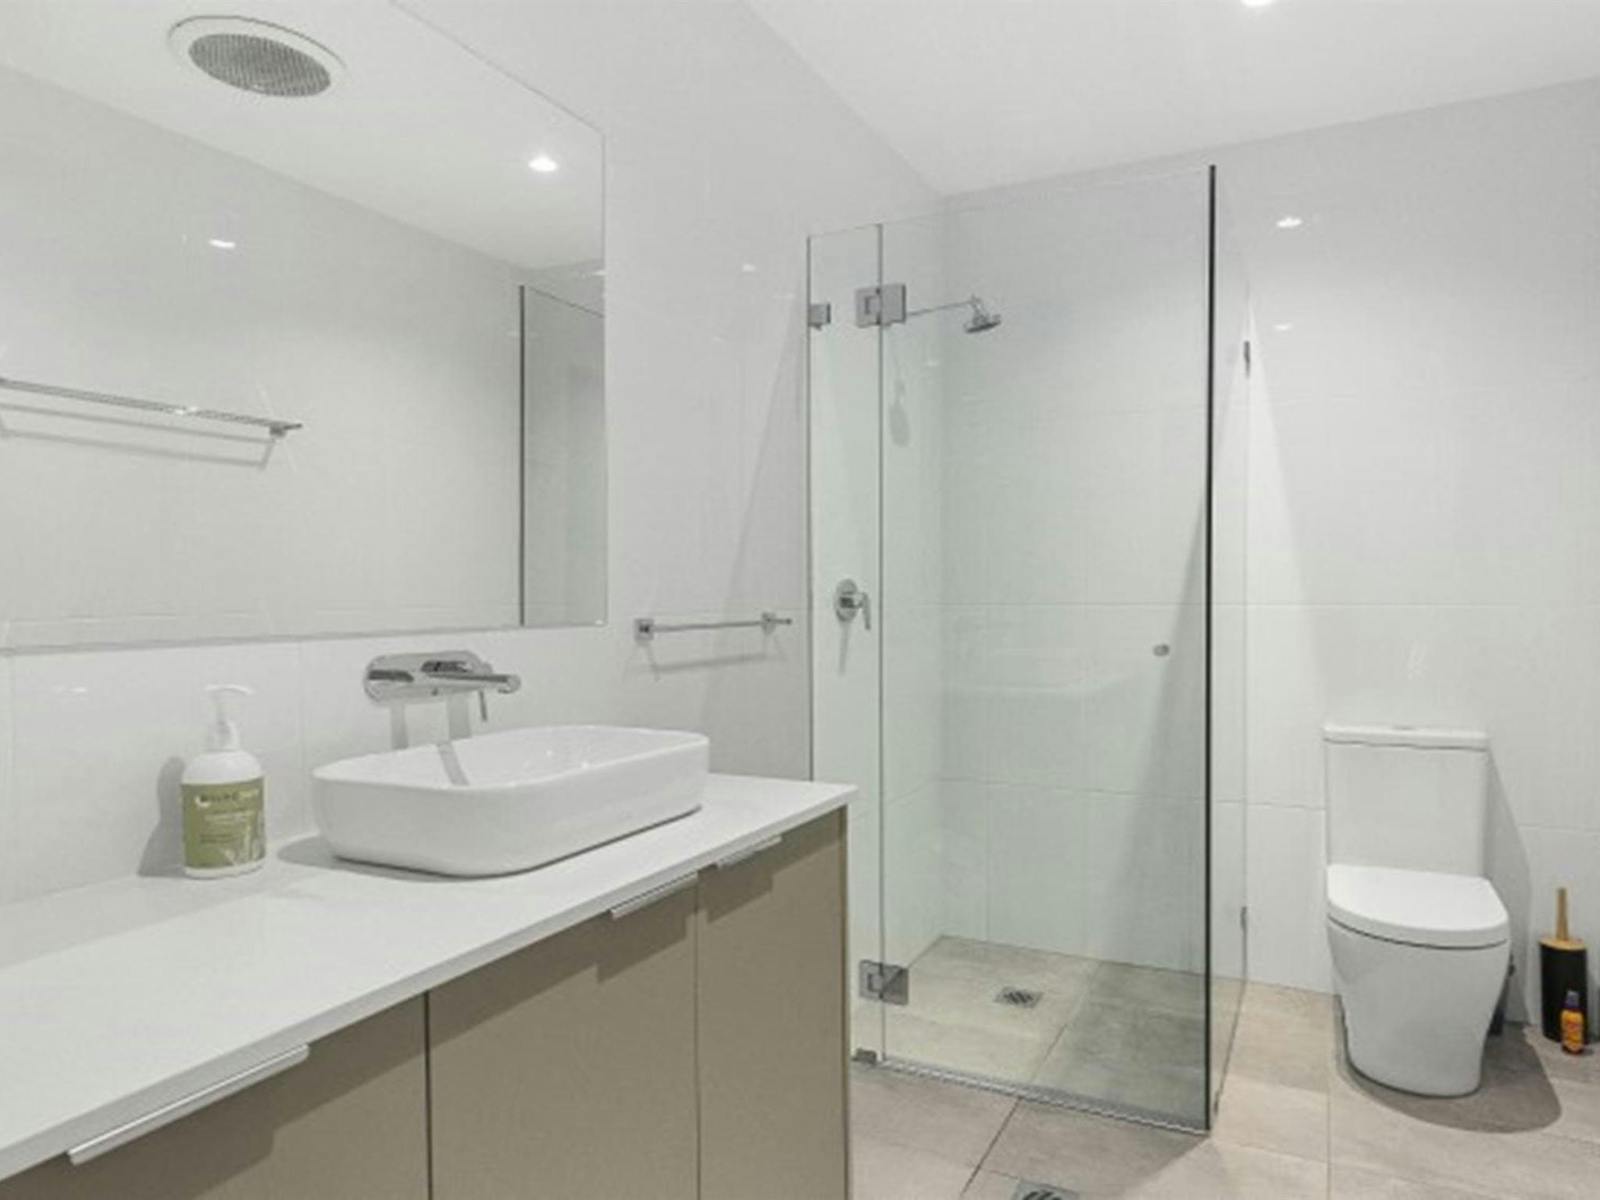 The bathroom at The Residence in New England National Park. Photo: Mitchell Franzi © DPIE